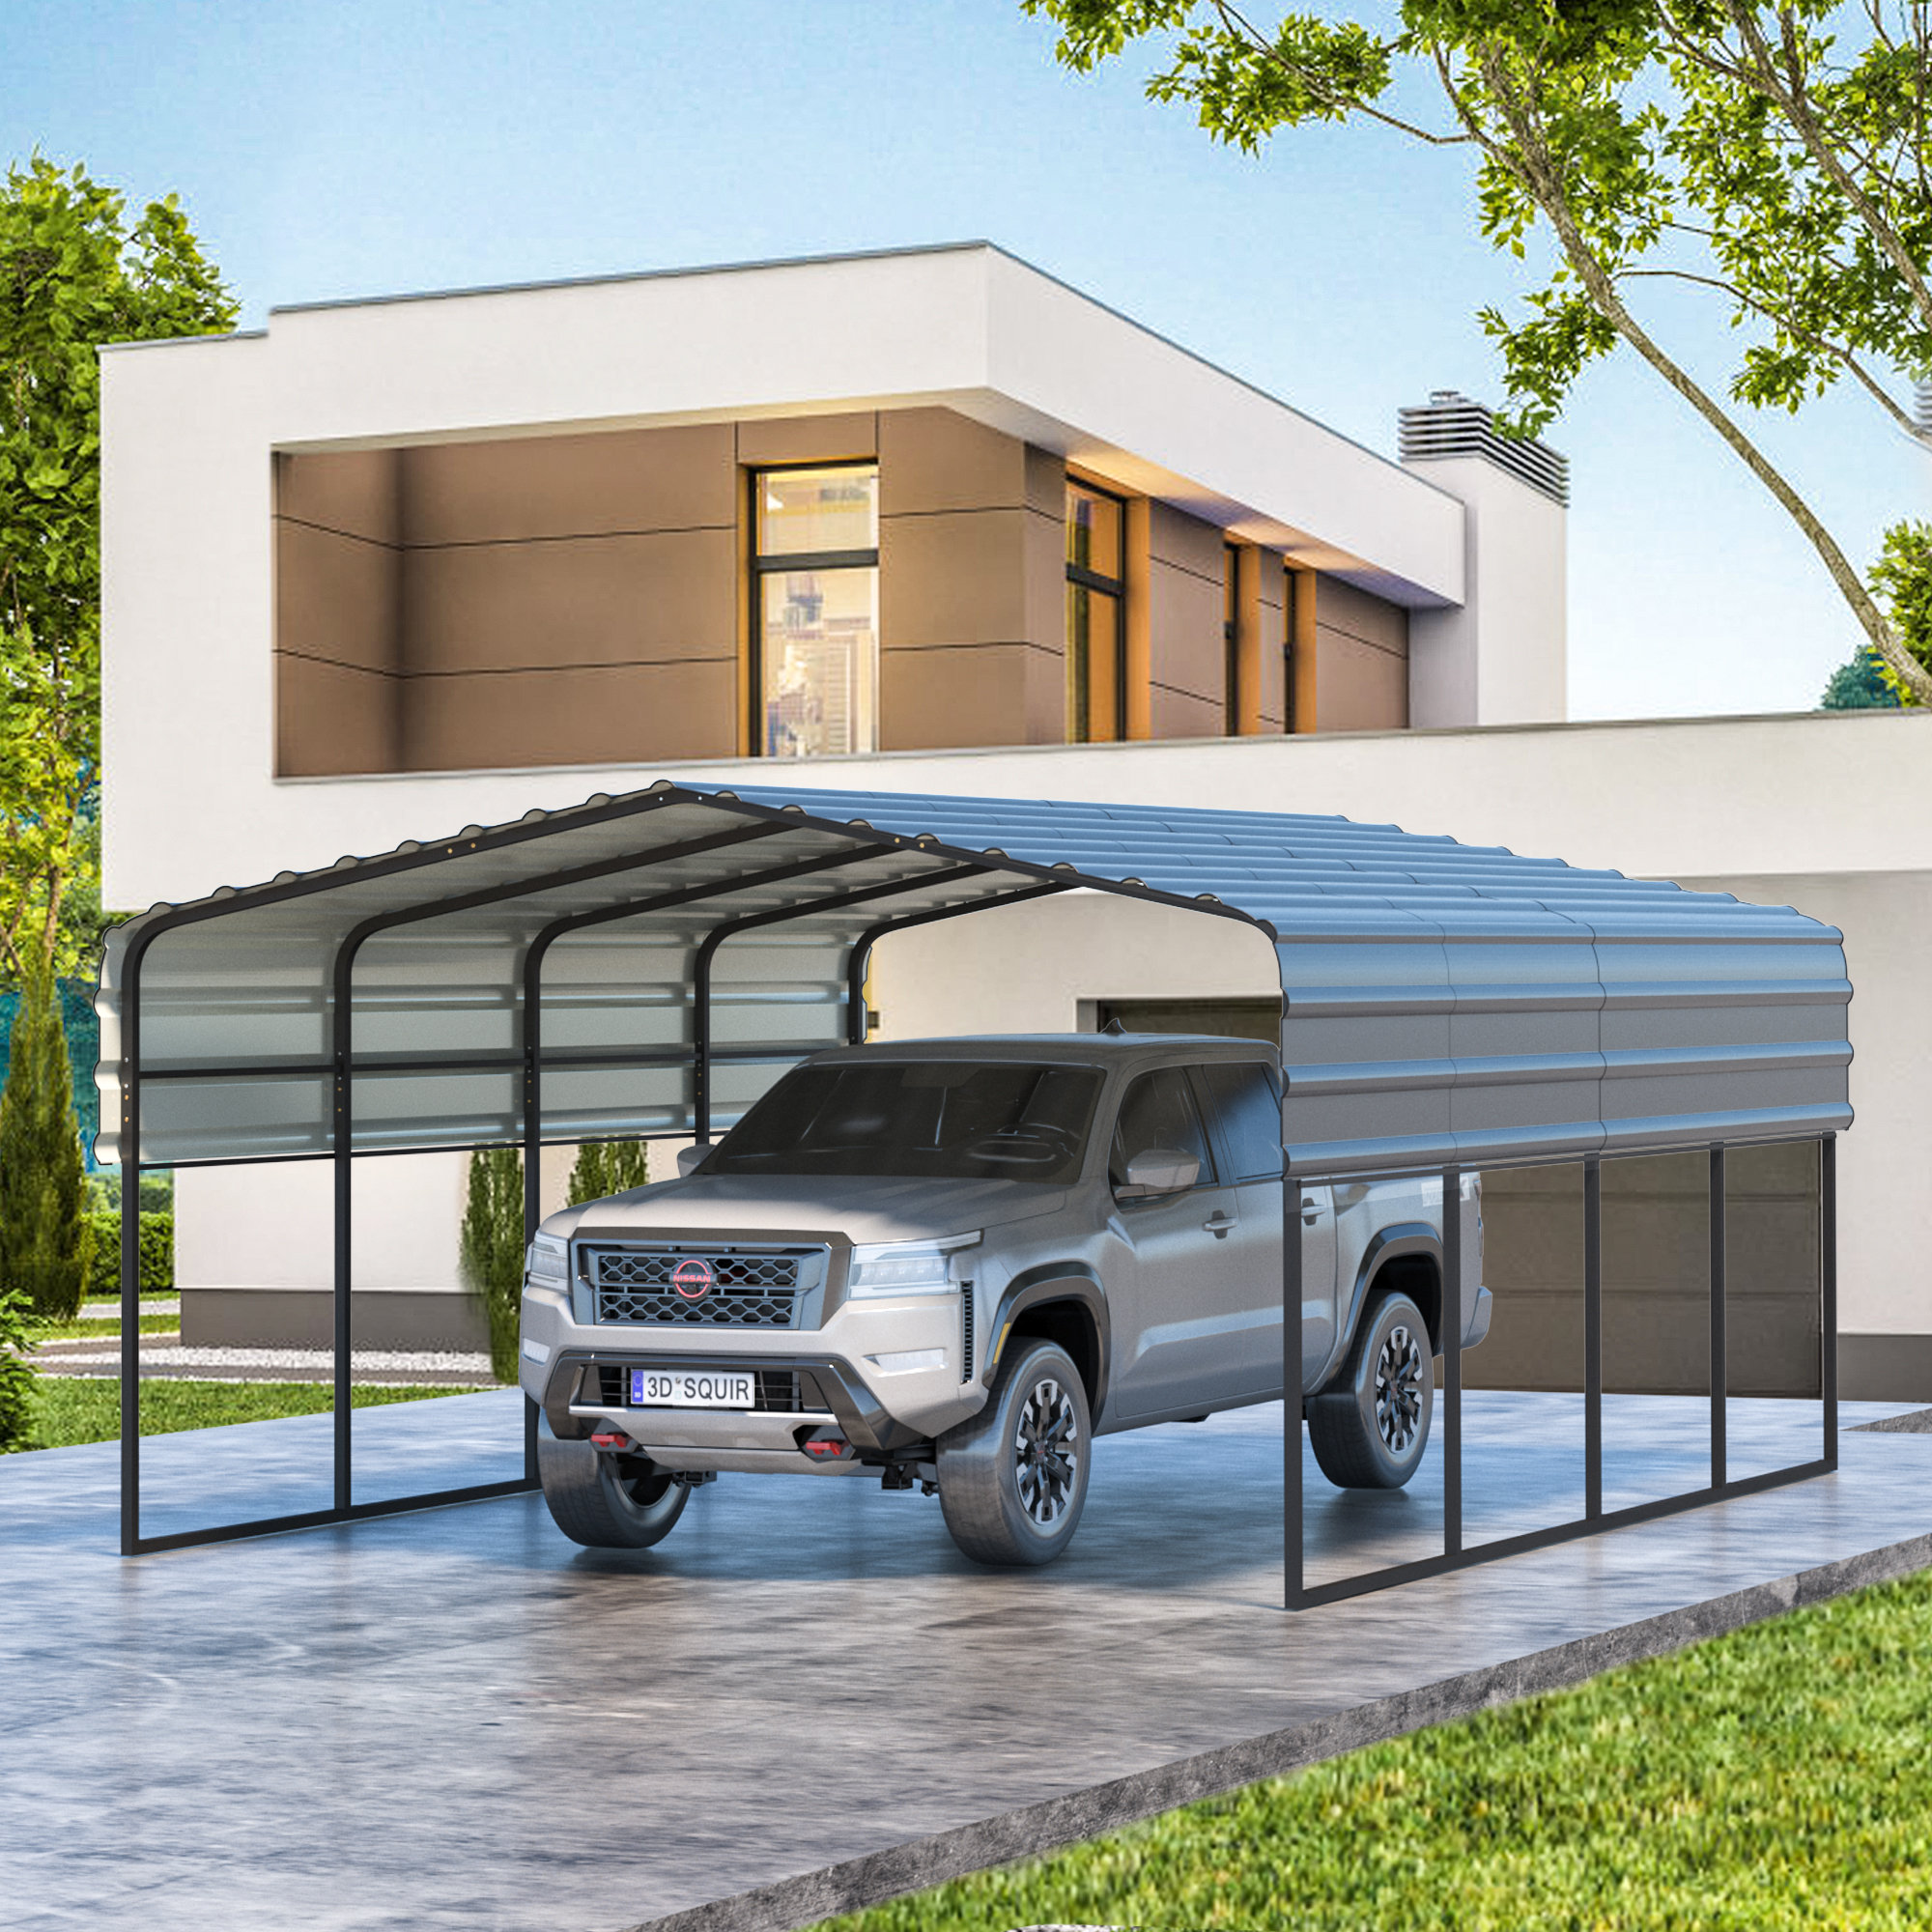 EROMMY 12 Ft. W x 20 Ft. D Carport with Galvanized Steel Roof & Reviews